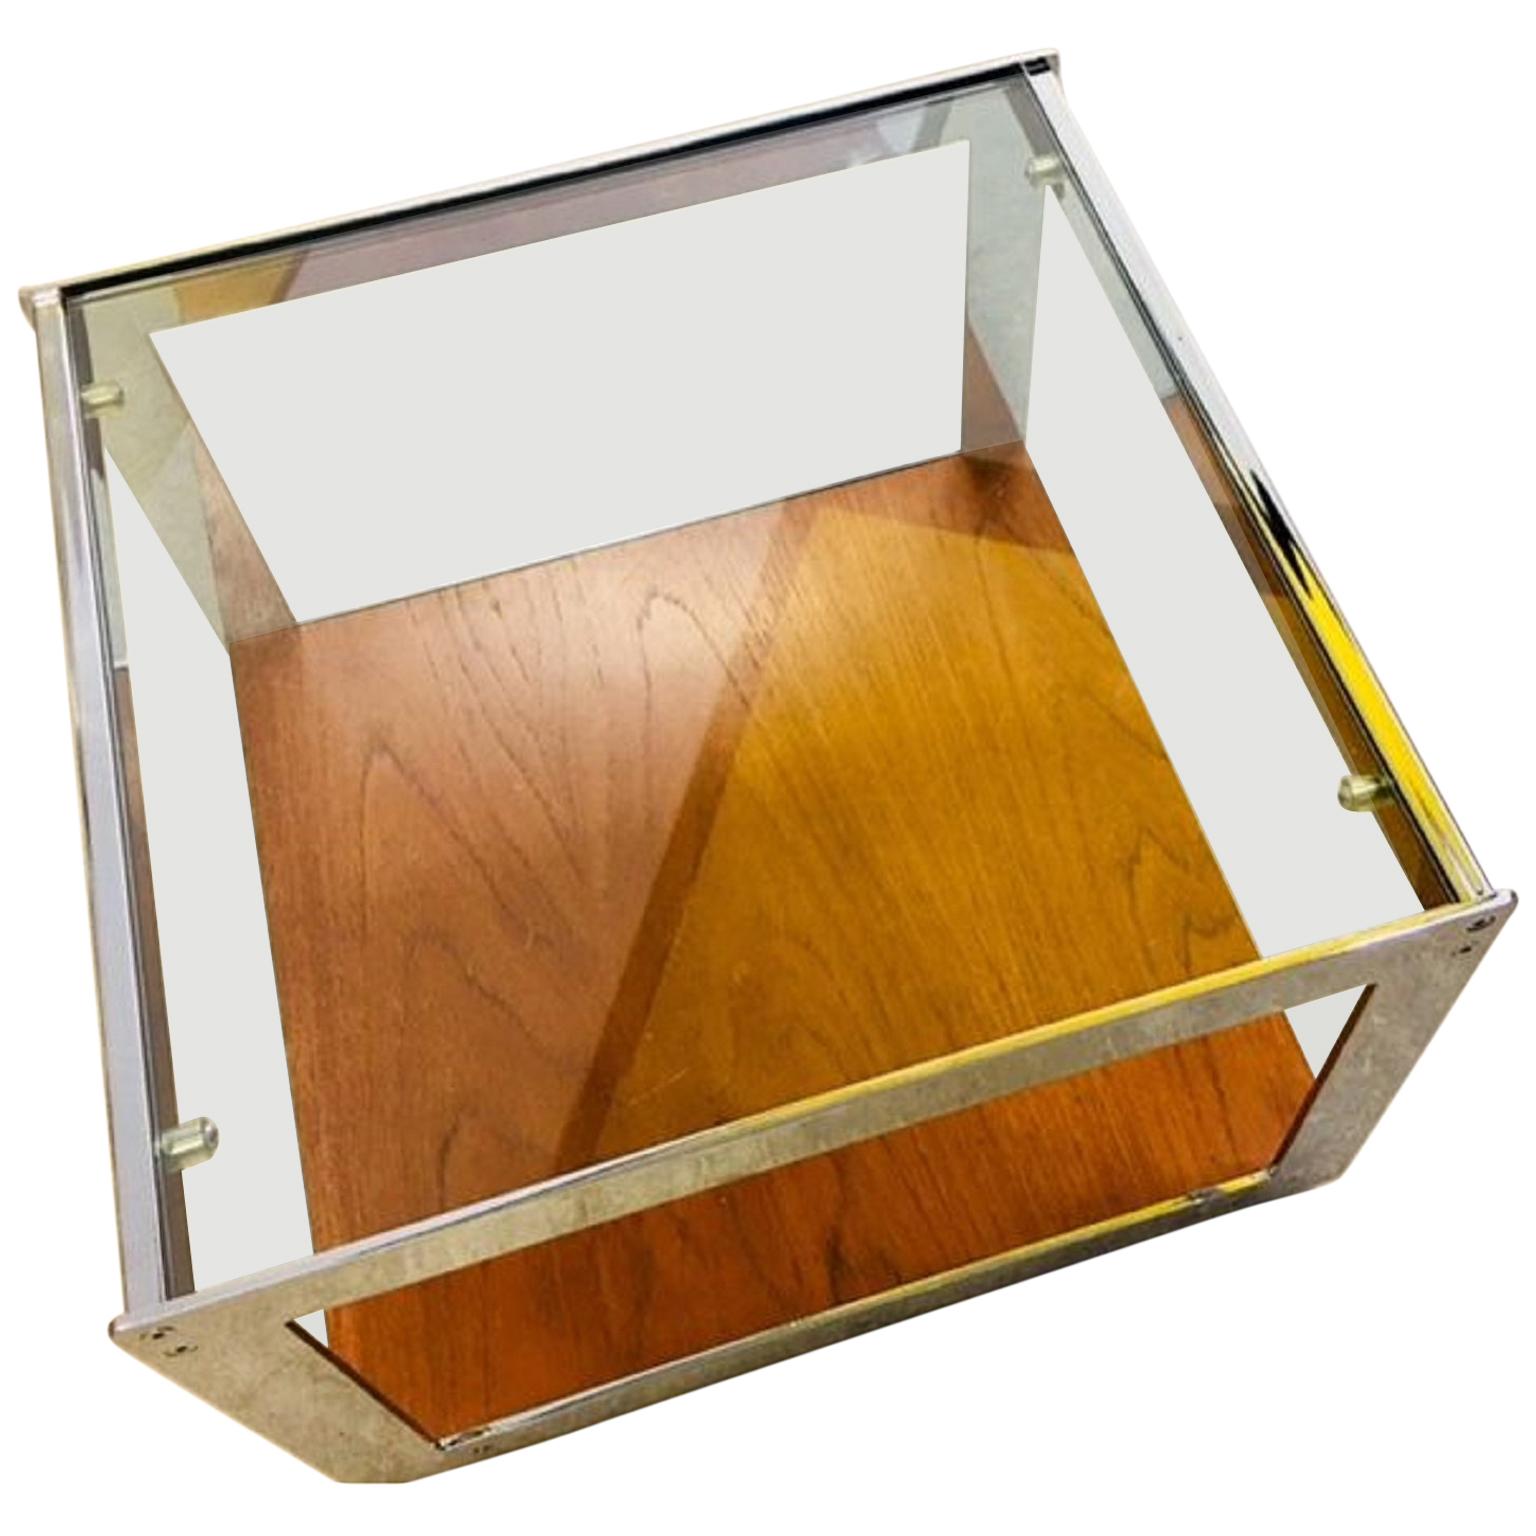 Merrow Assocs. Teak and Chrome Side Table by Richard Young, 1970s